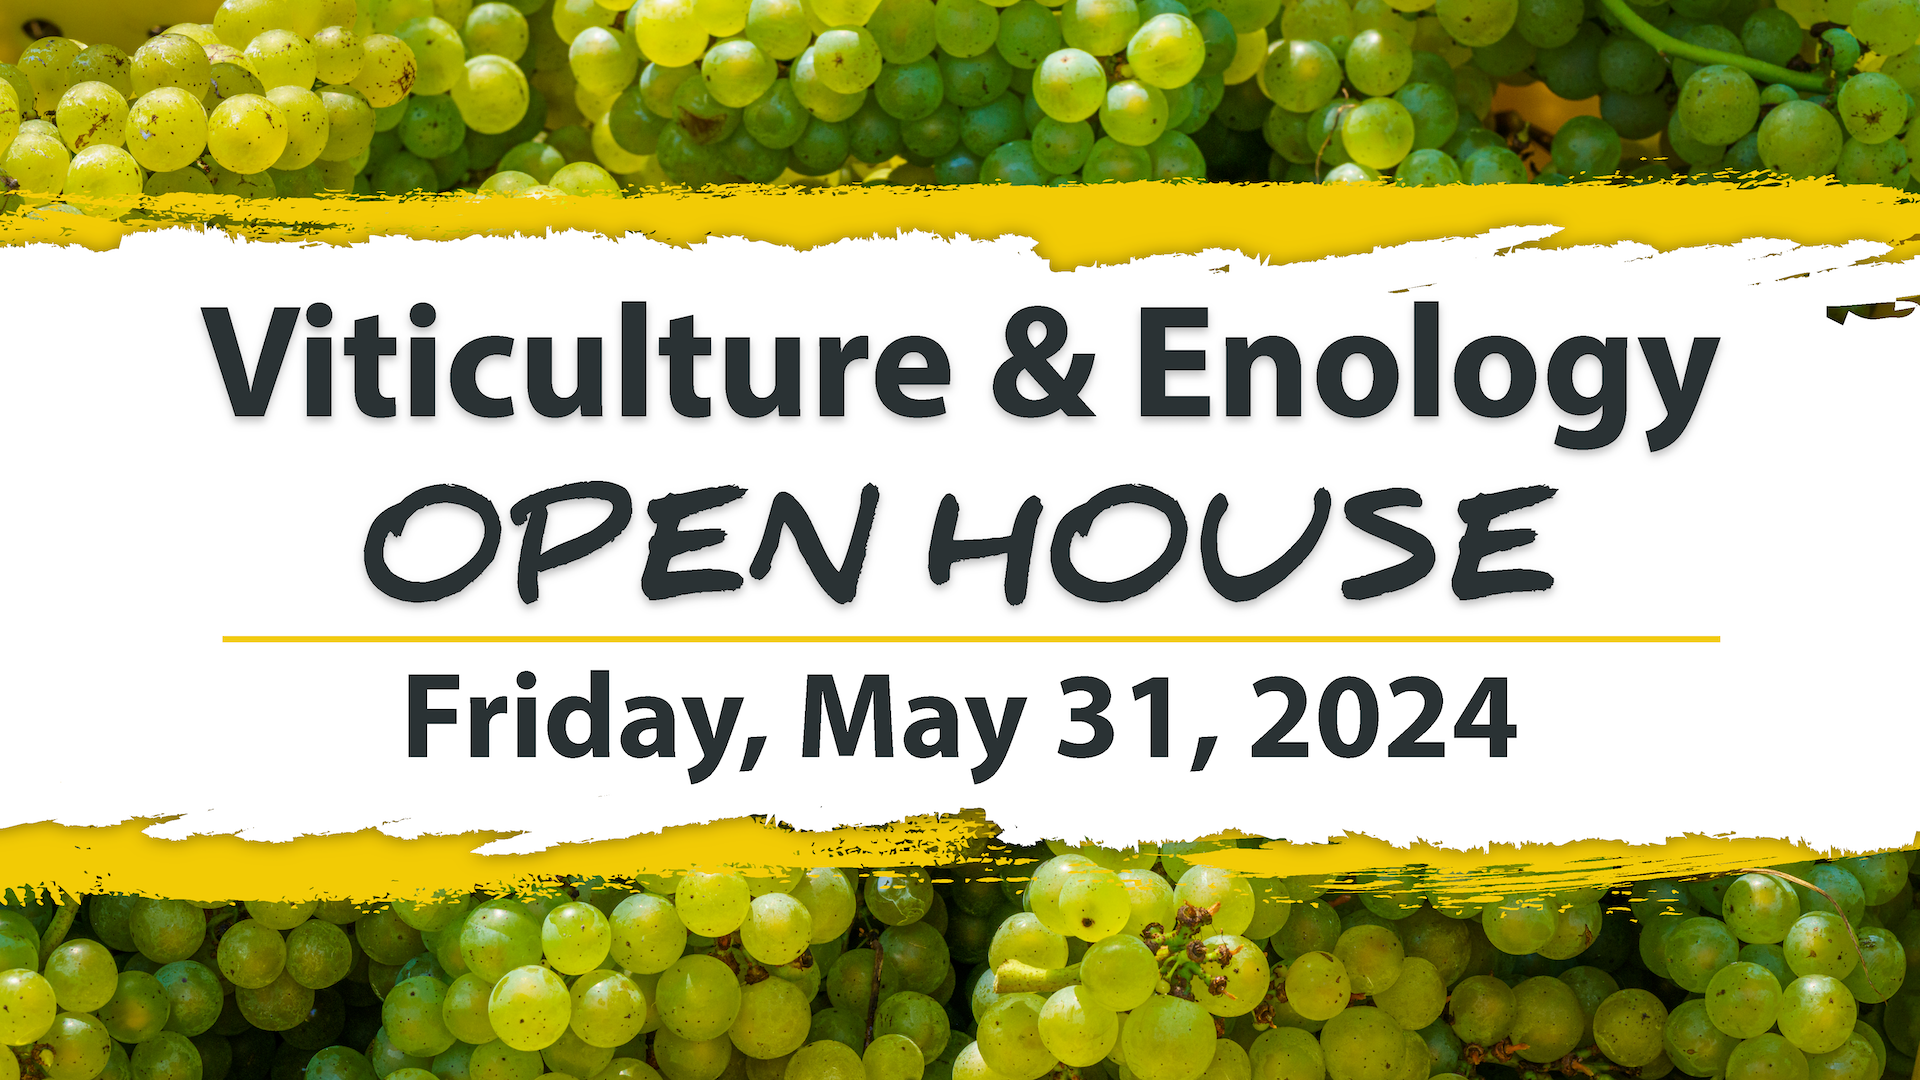 Viticulture & Enology Open House 2024